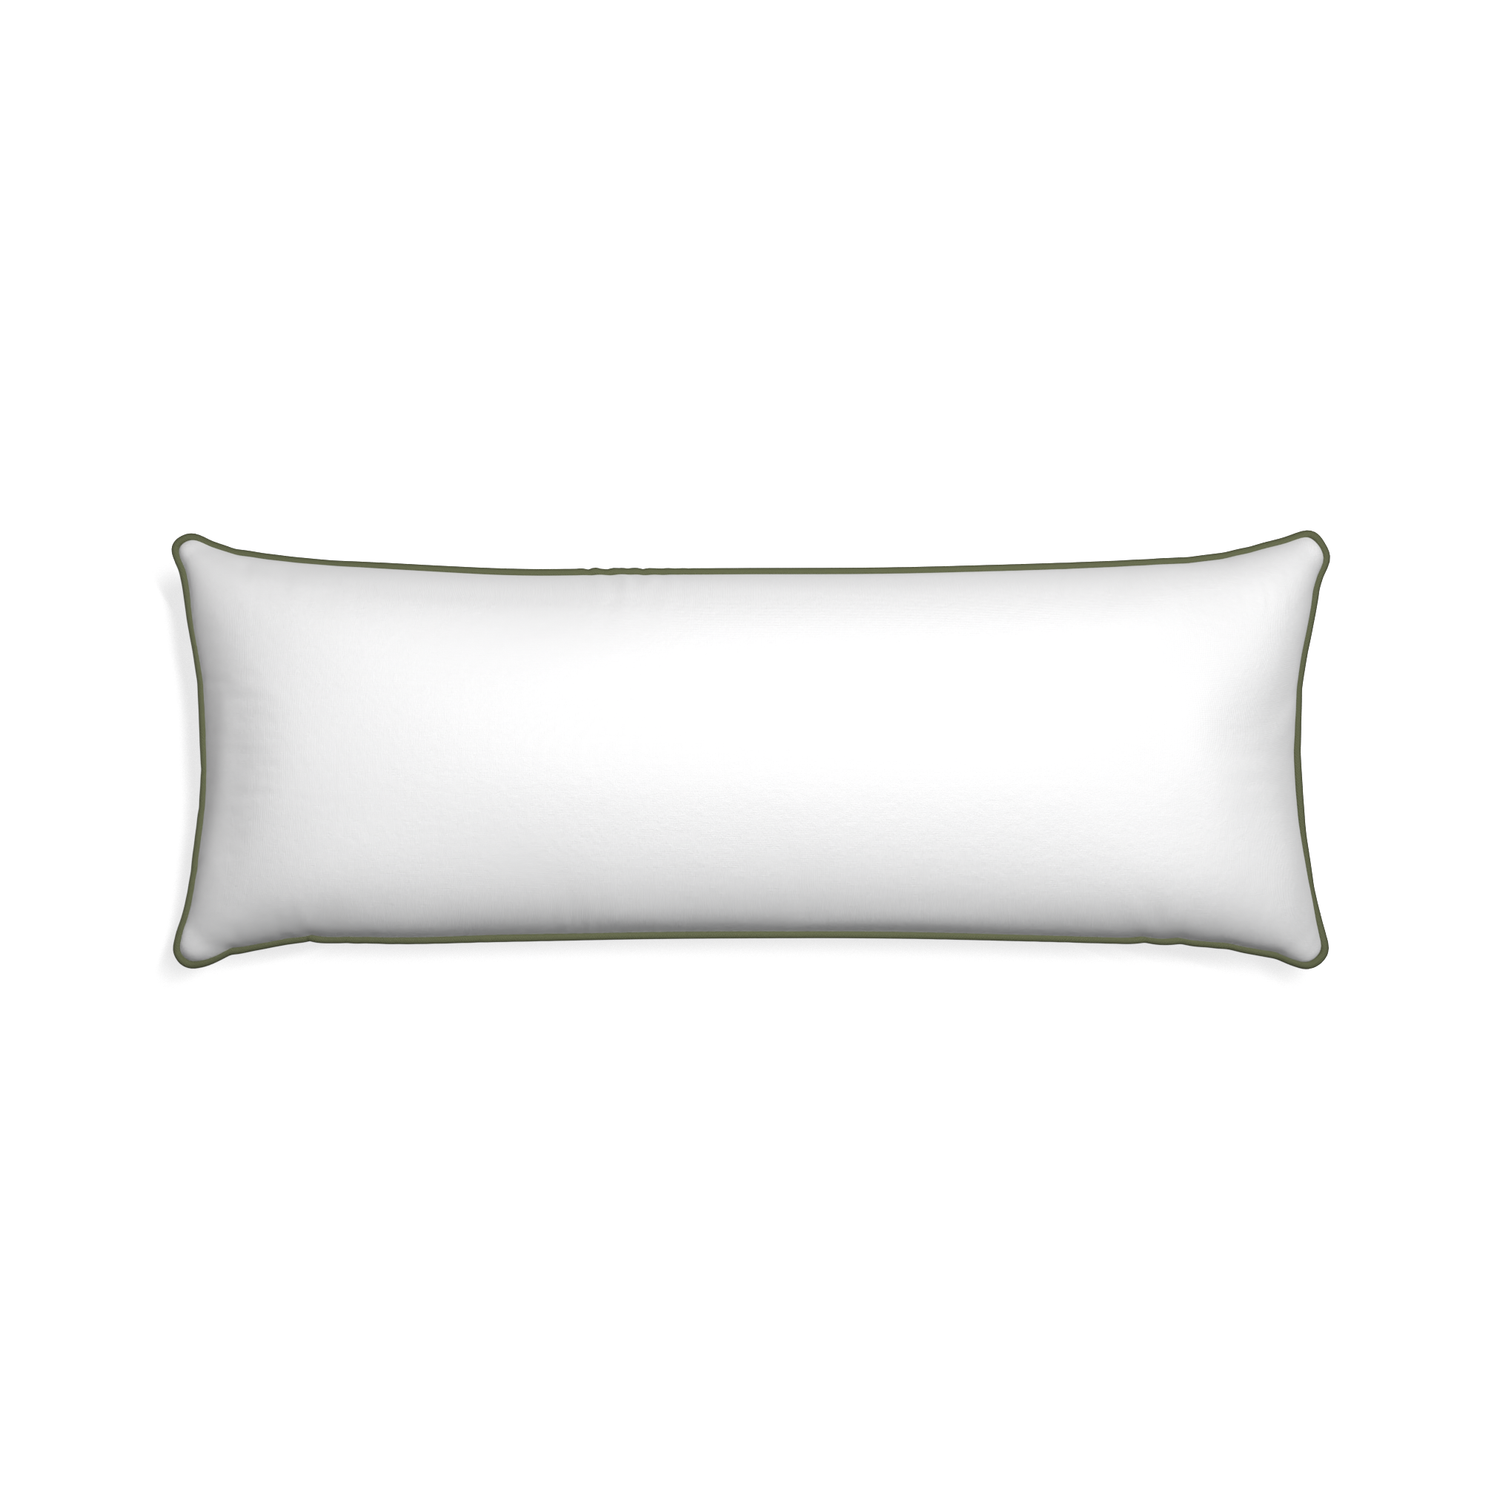 Xl-lumbar snow custom pillow with f piping on white background